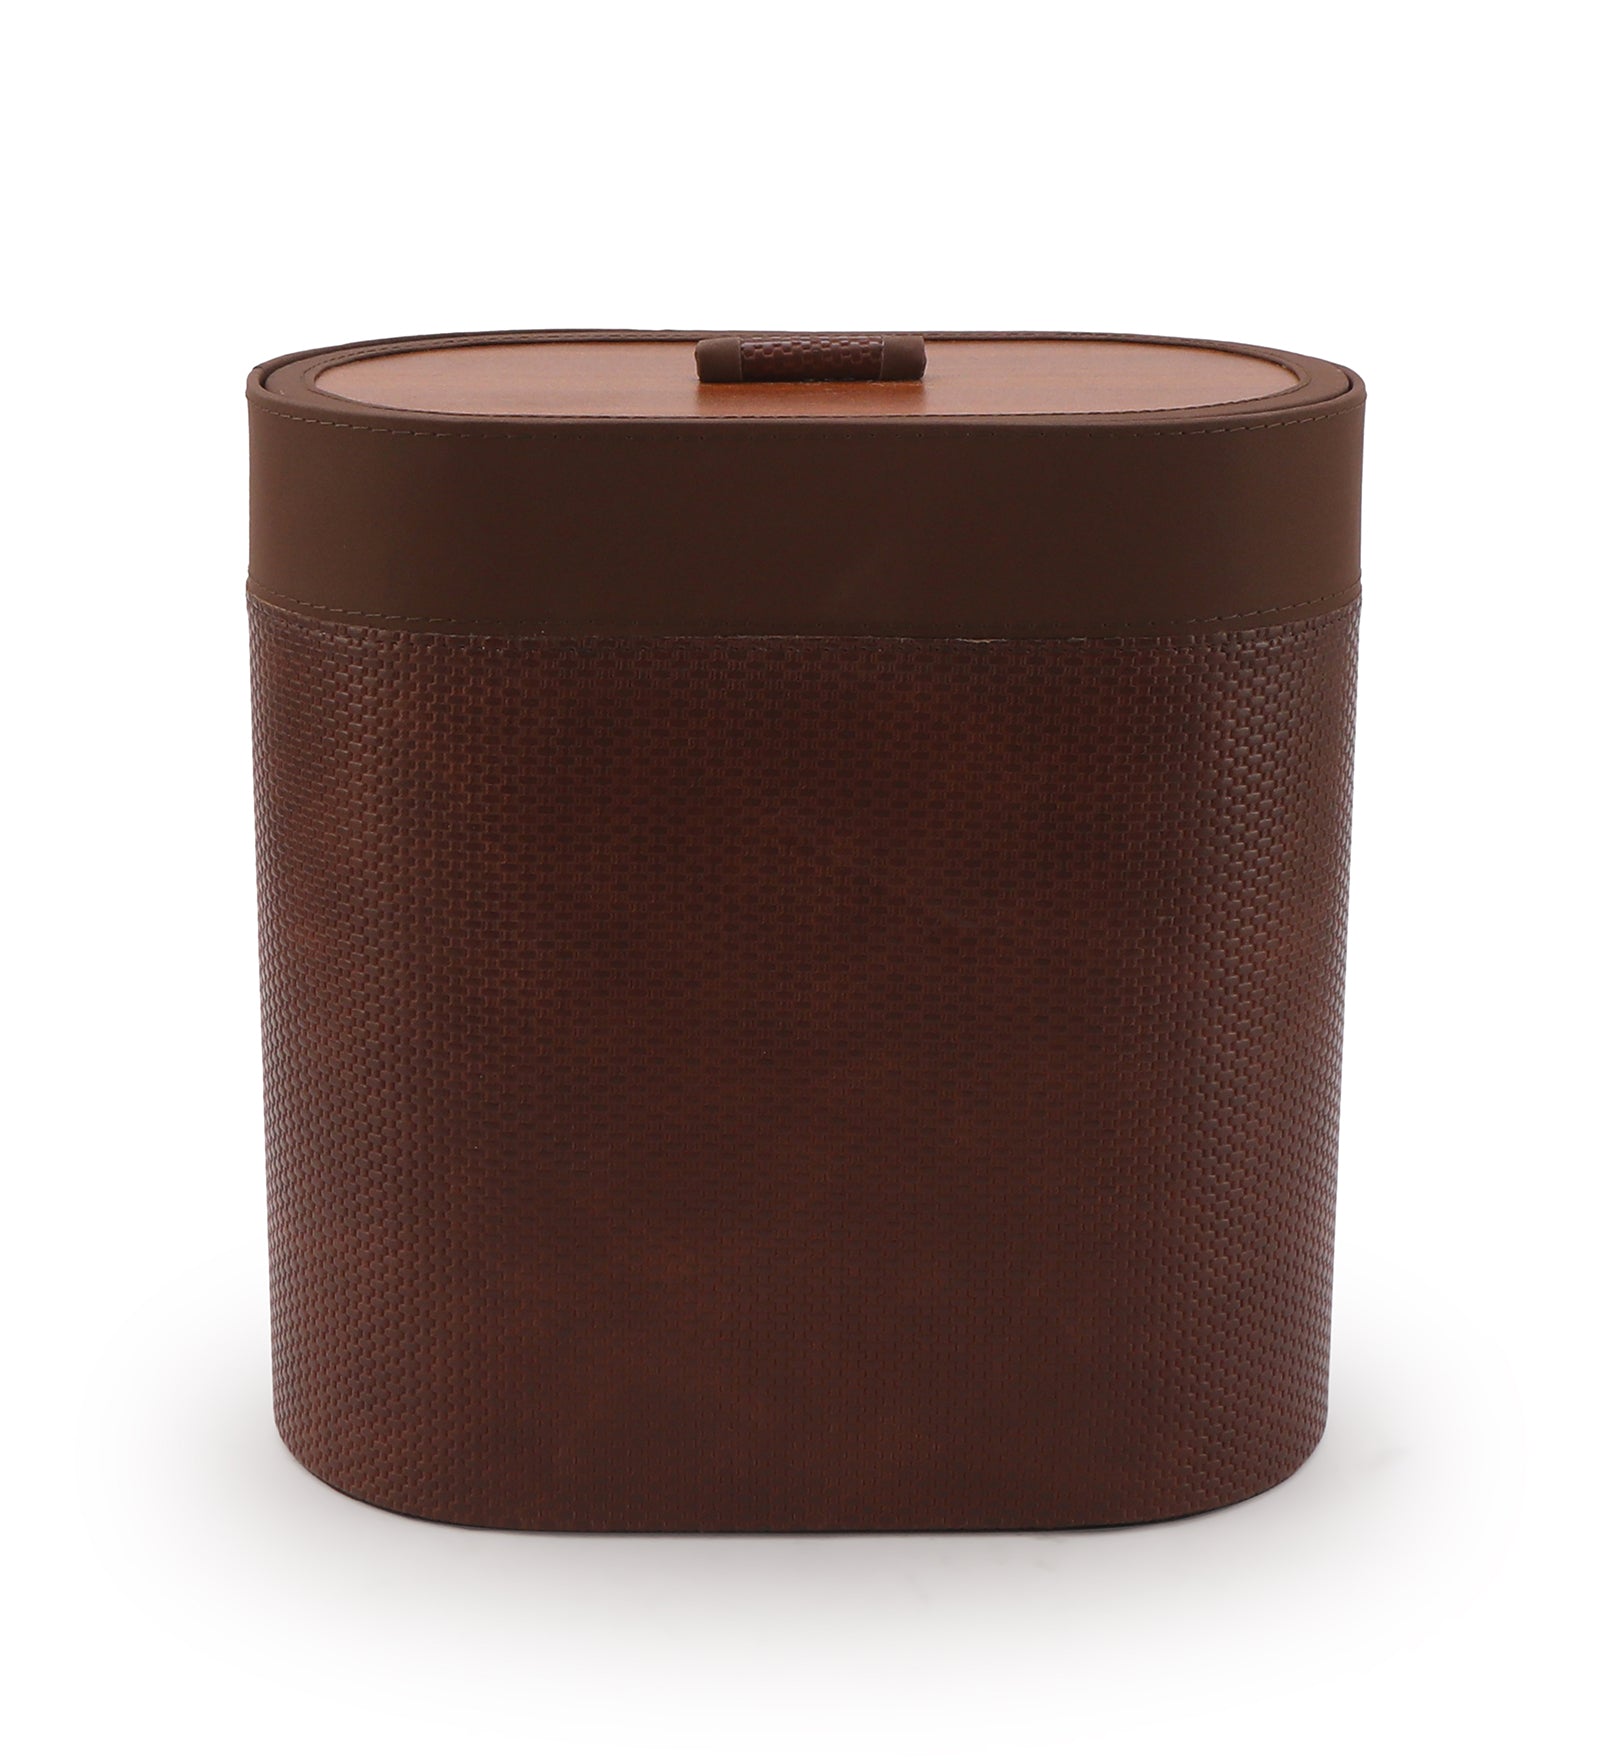 Dustbin With Lid - Brown Leatherette - The Home Co.